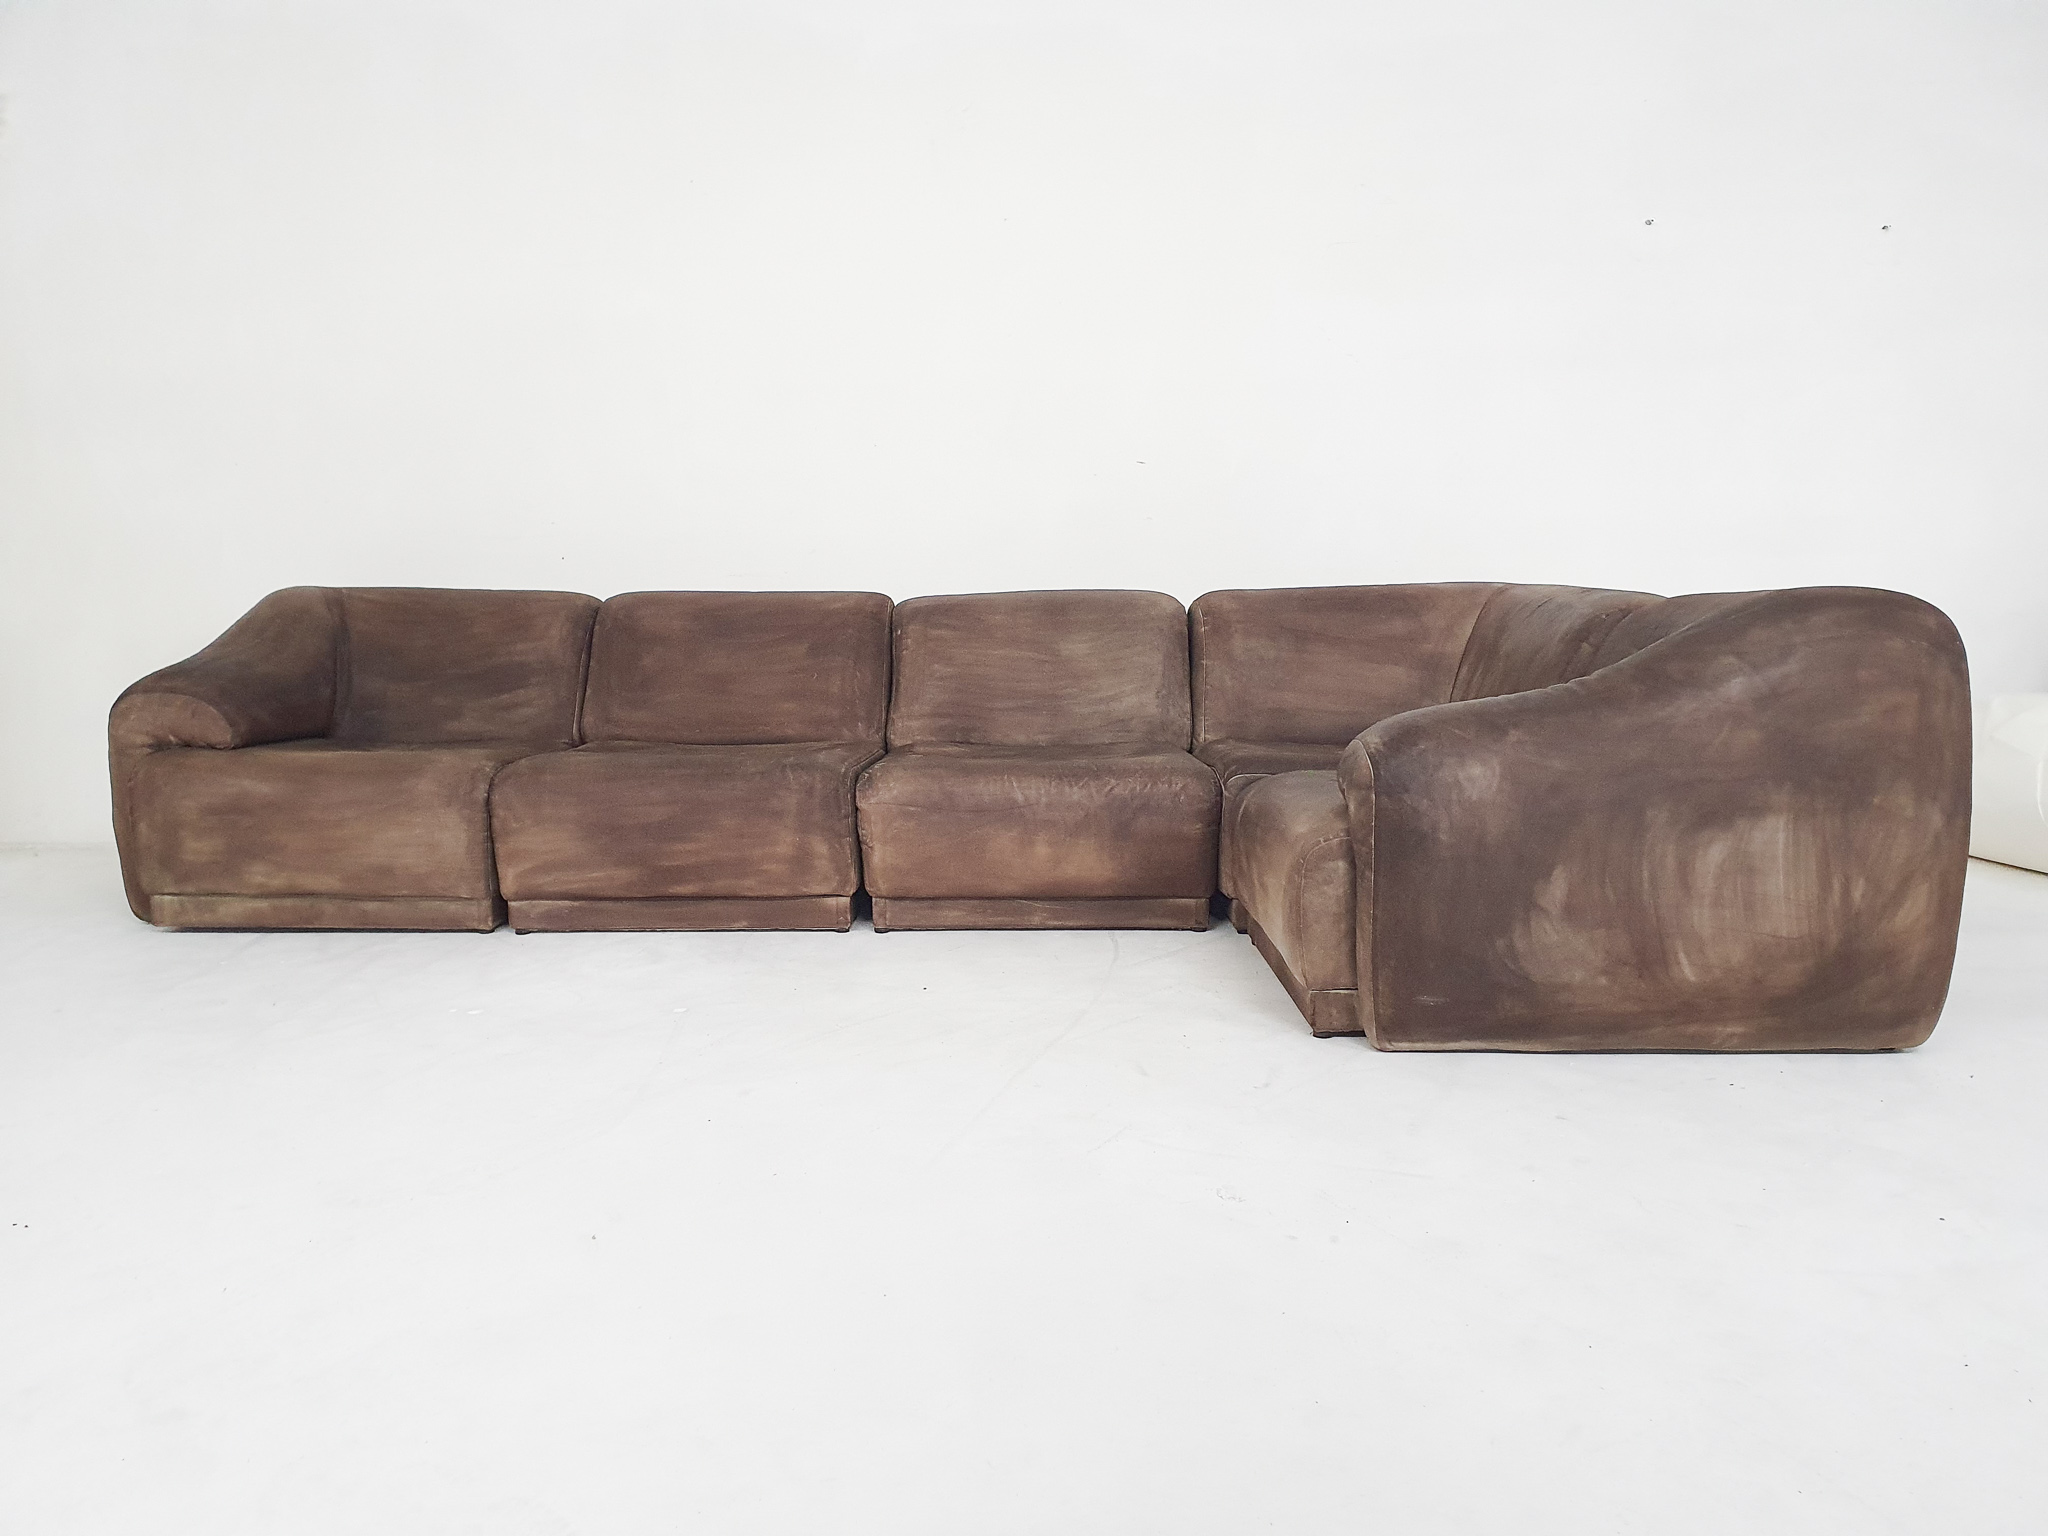 Sofas | Buy Vintage Design Als Seating Goed Oud at Zo